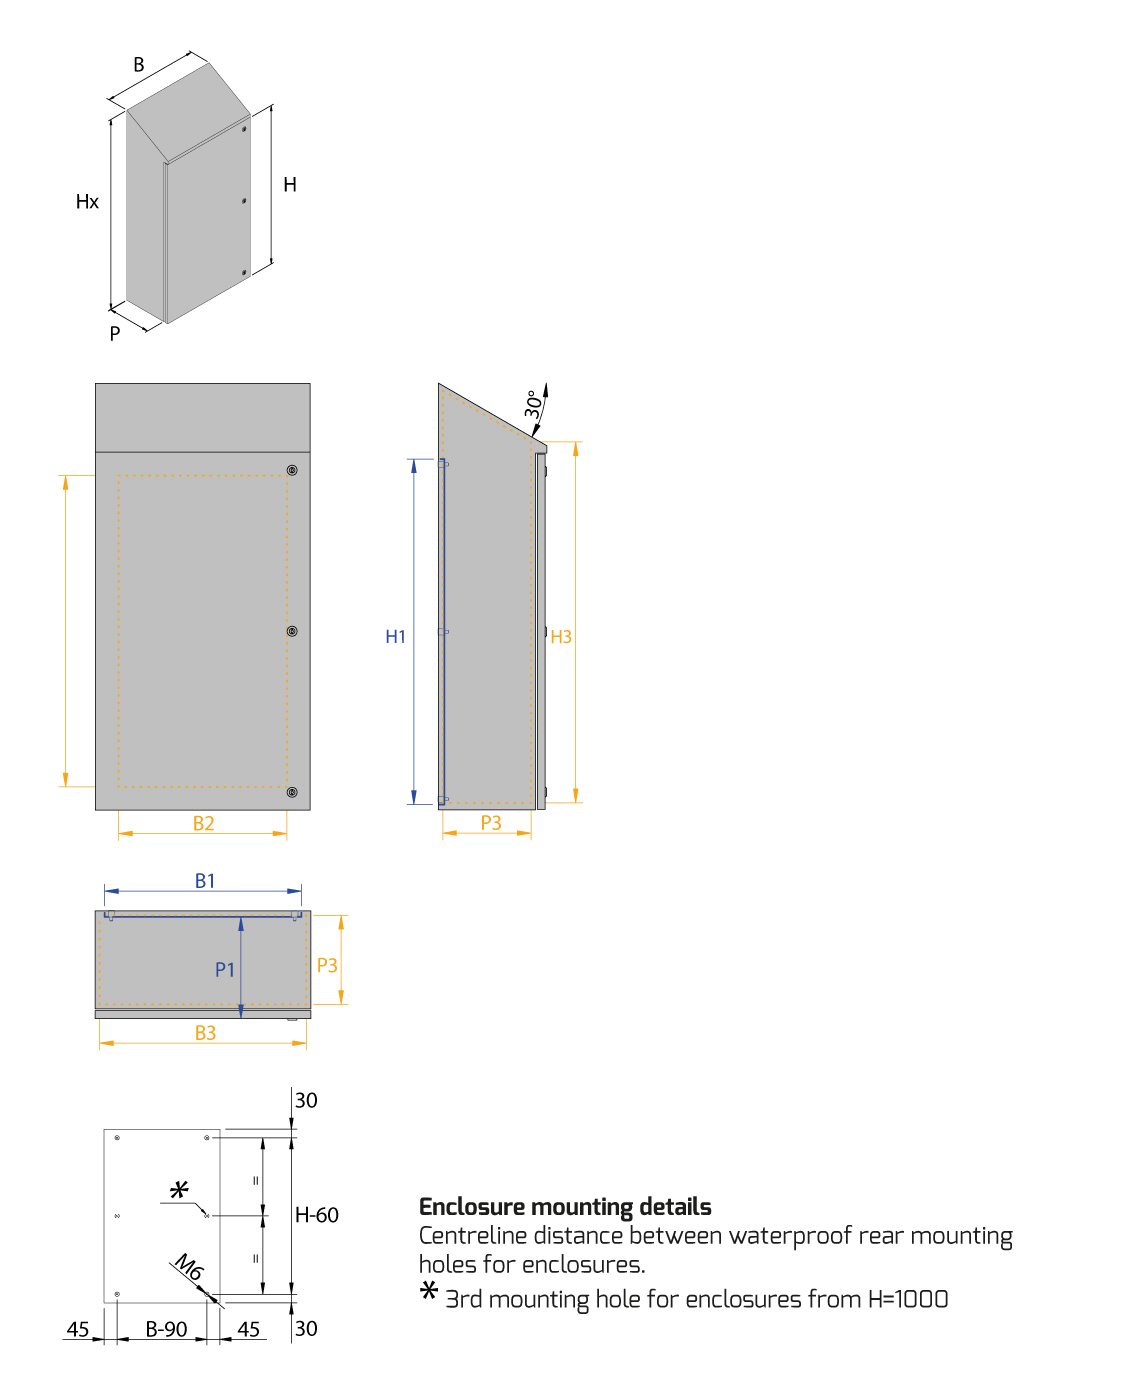 Technical drawing - CH enclosure